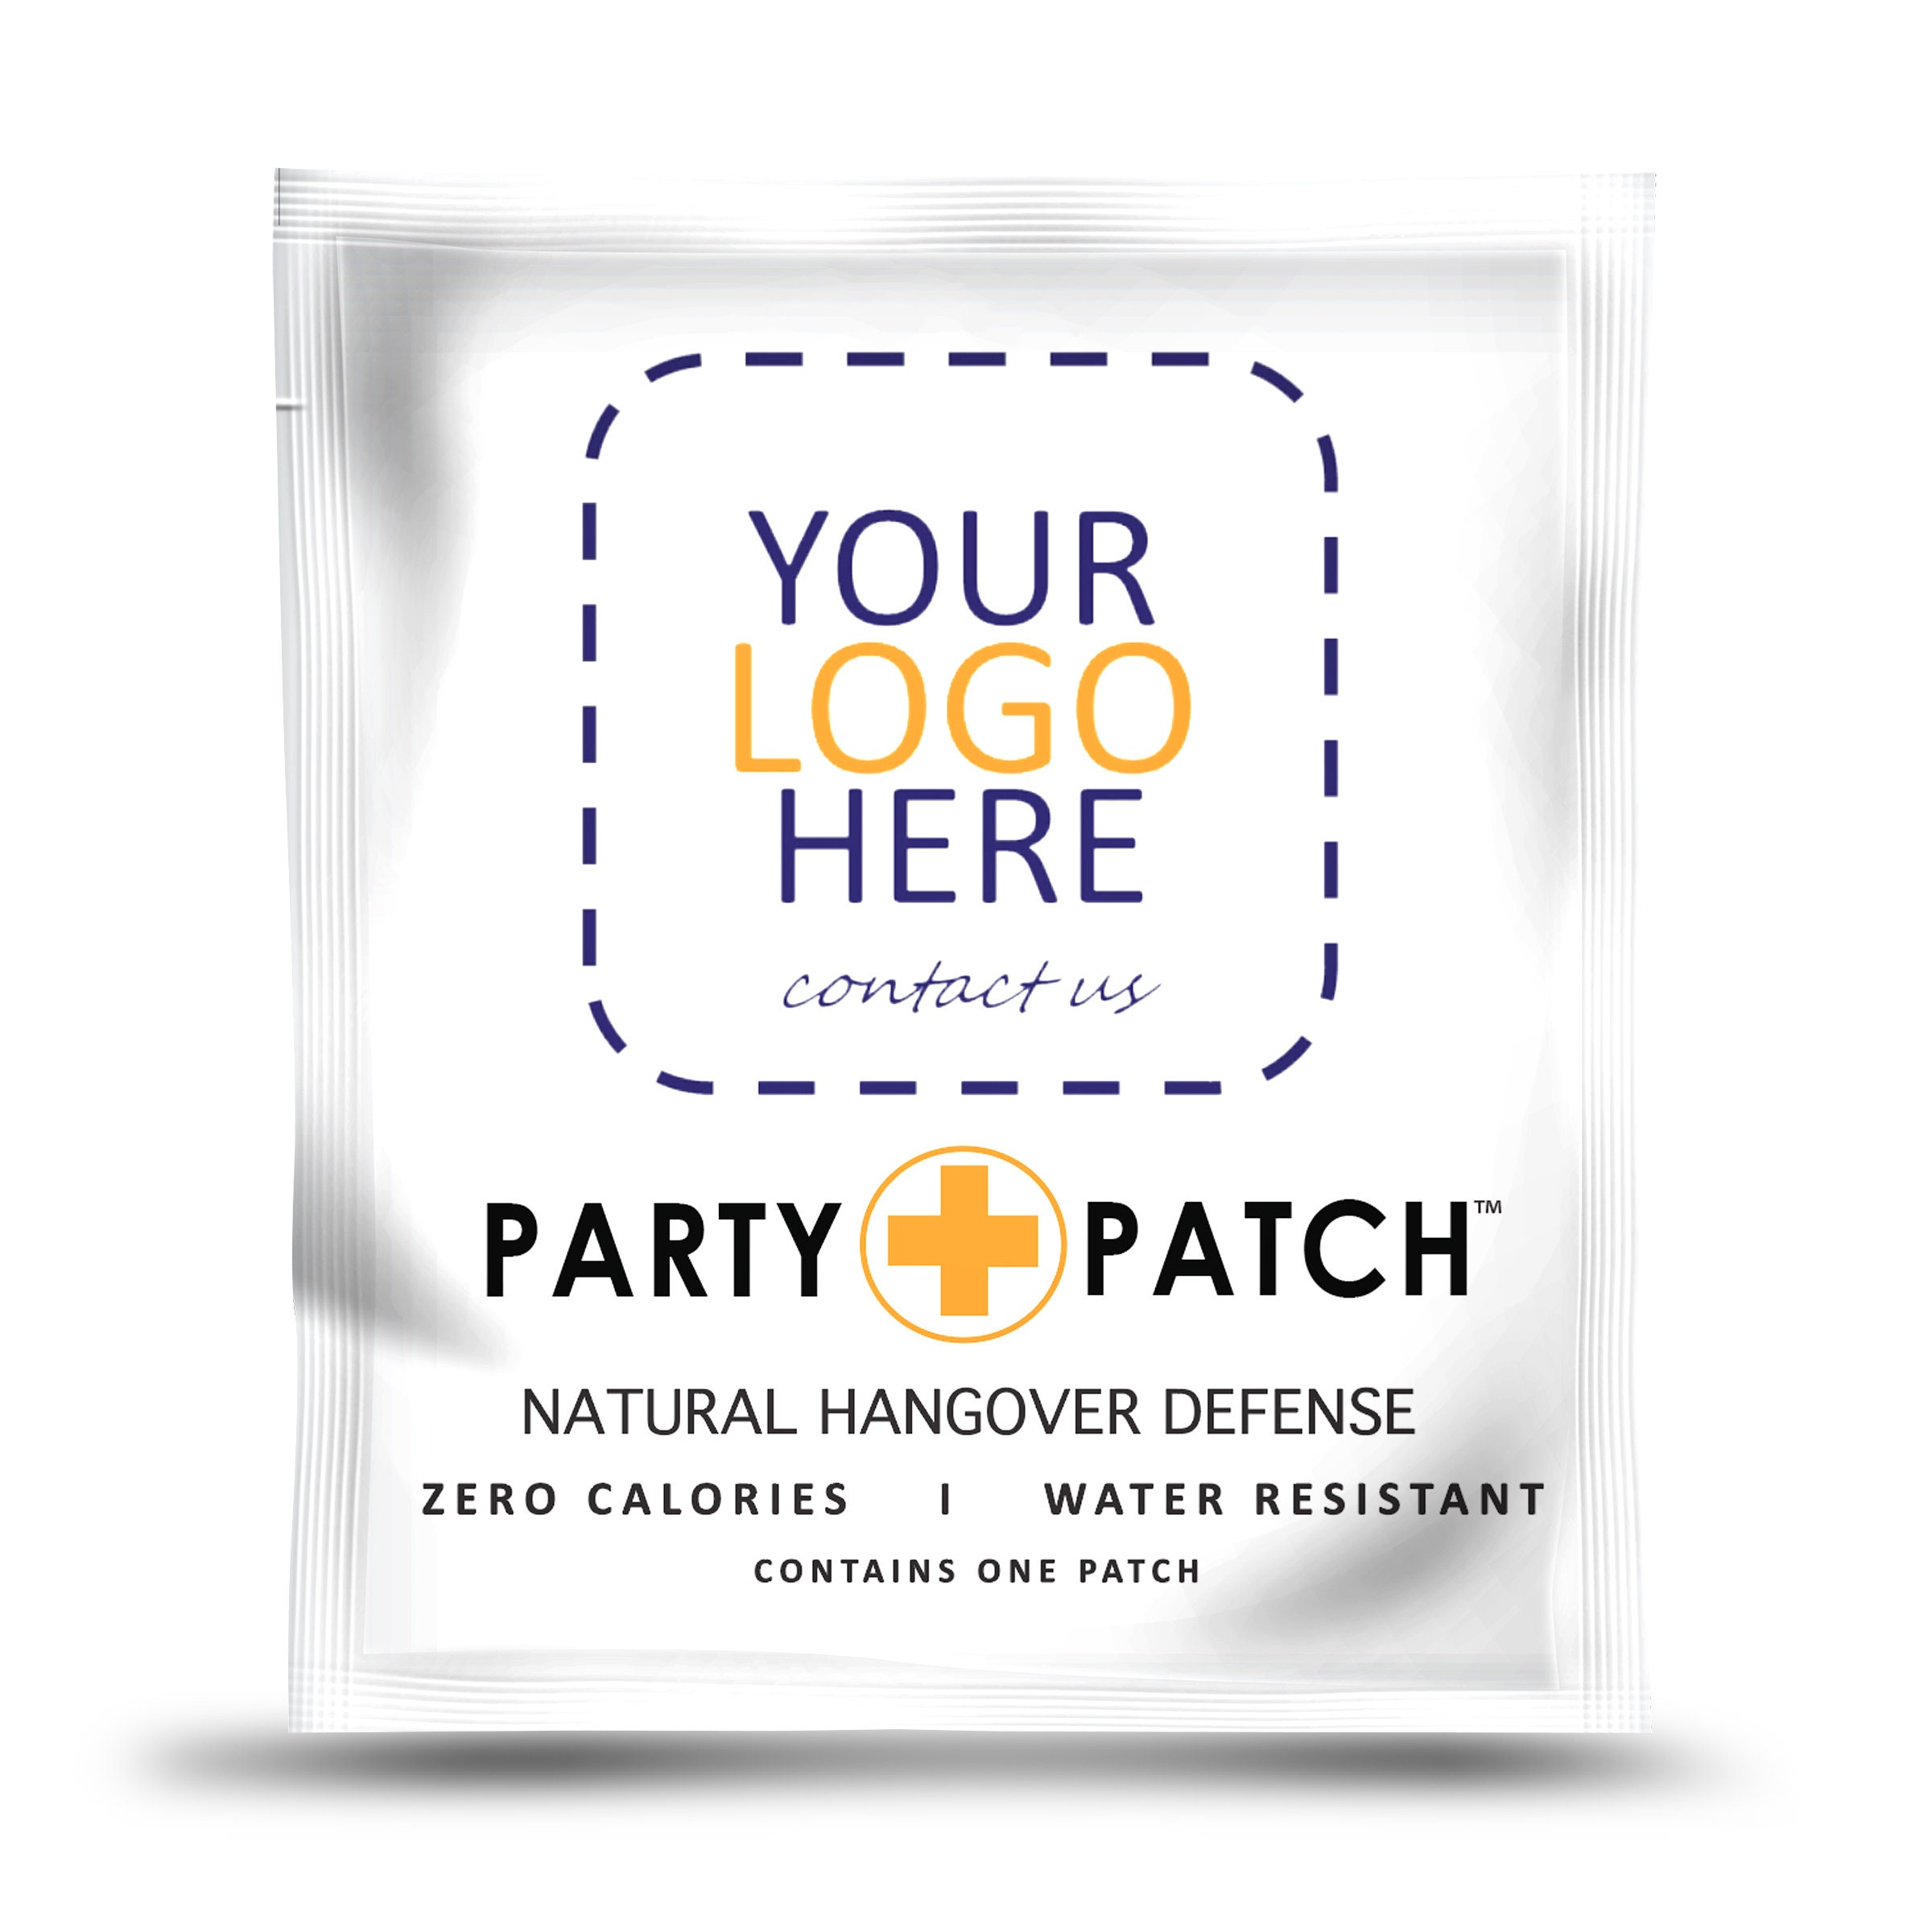 Party Patch - Party Patch is the ultimate hangover defense. Apply